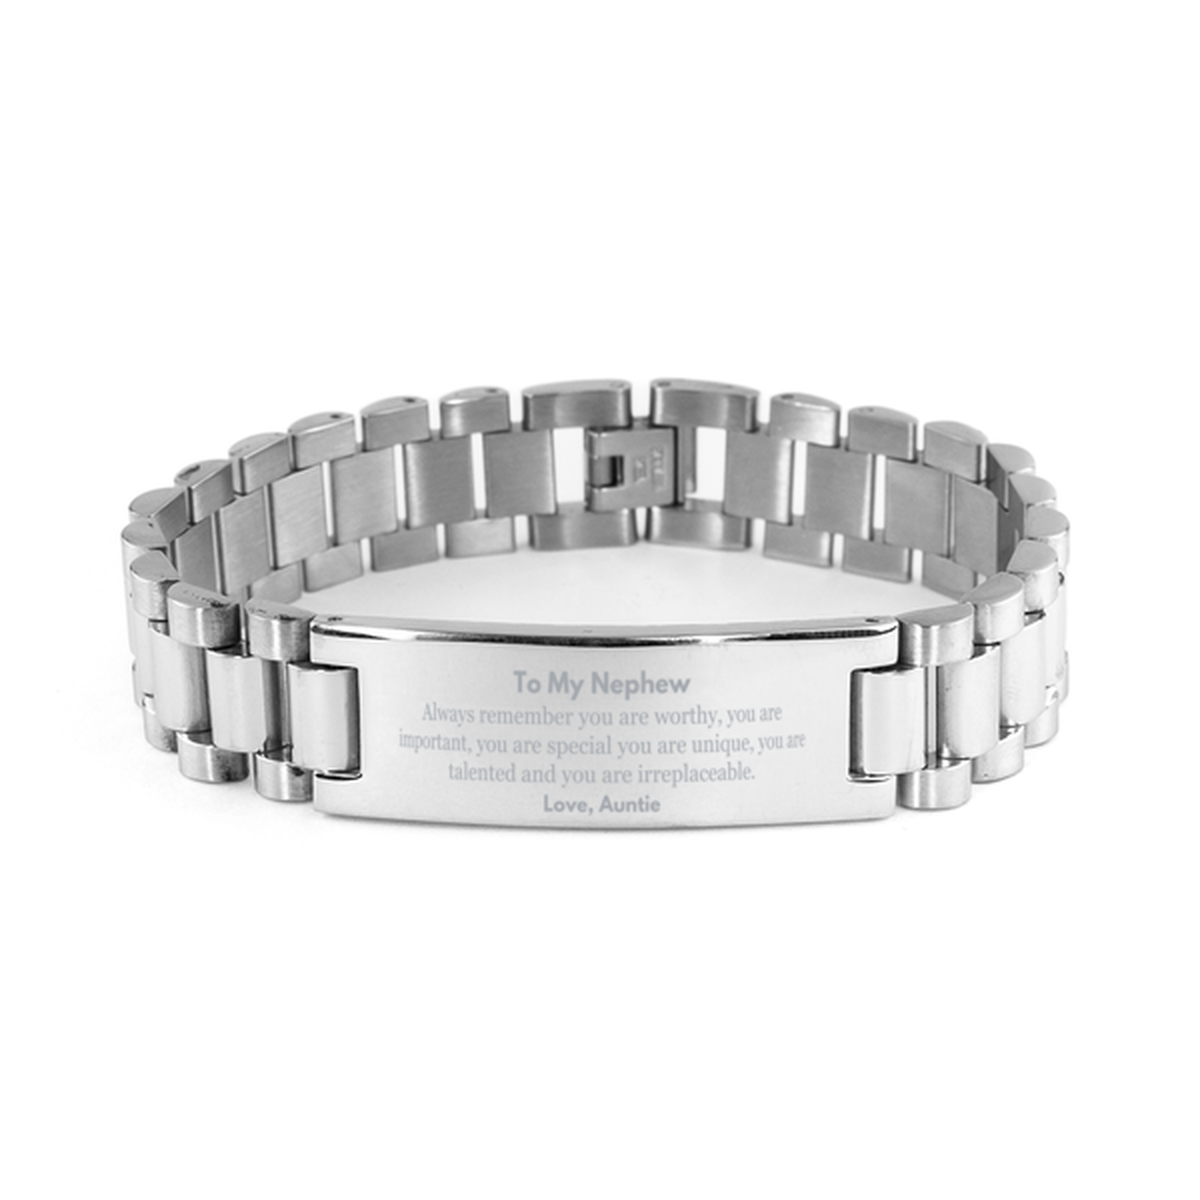 Nephew Birthday Gifts from Auntie, Inspirational Ladder Stainless Steel Bracelet for Nephew Christmas Graduation Gifts for Nephew Always remember you are worthy, you are important. Love, Auntie